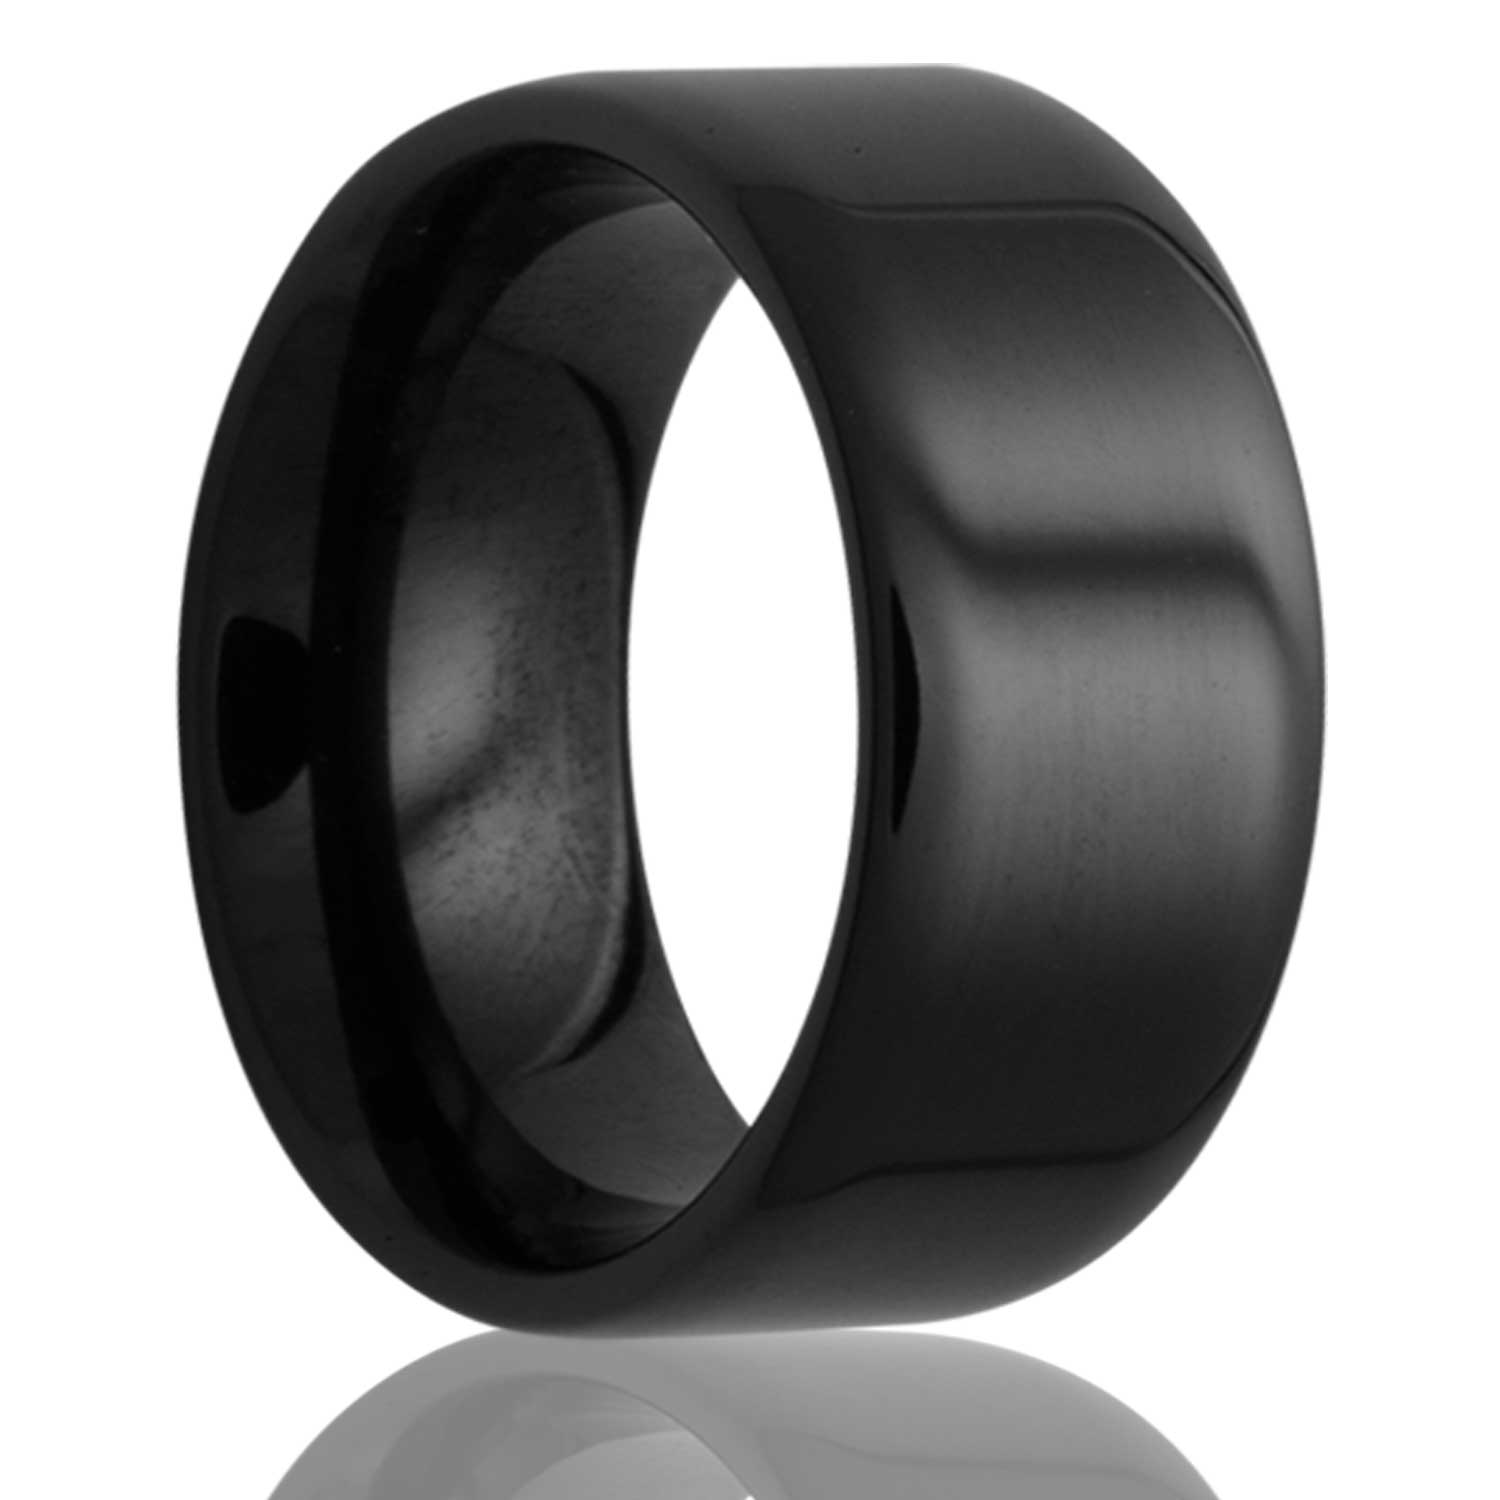 A classic black ceramic wedding band displayed on a neutral white background.